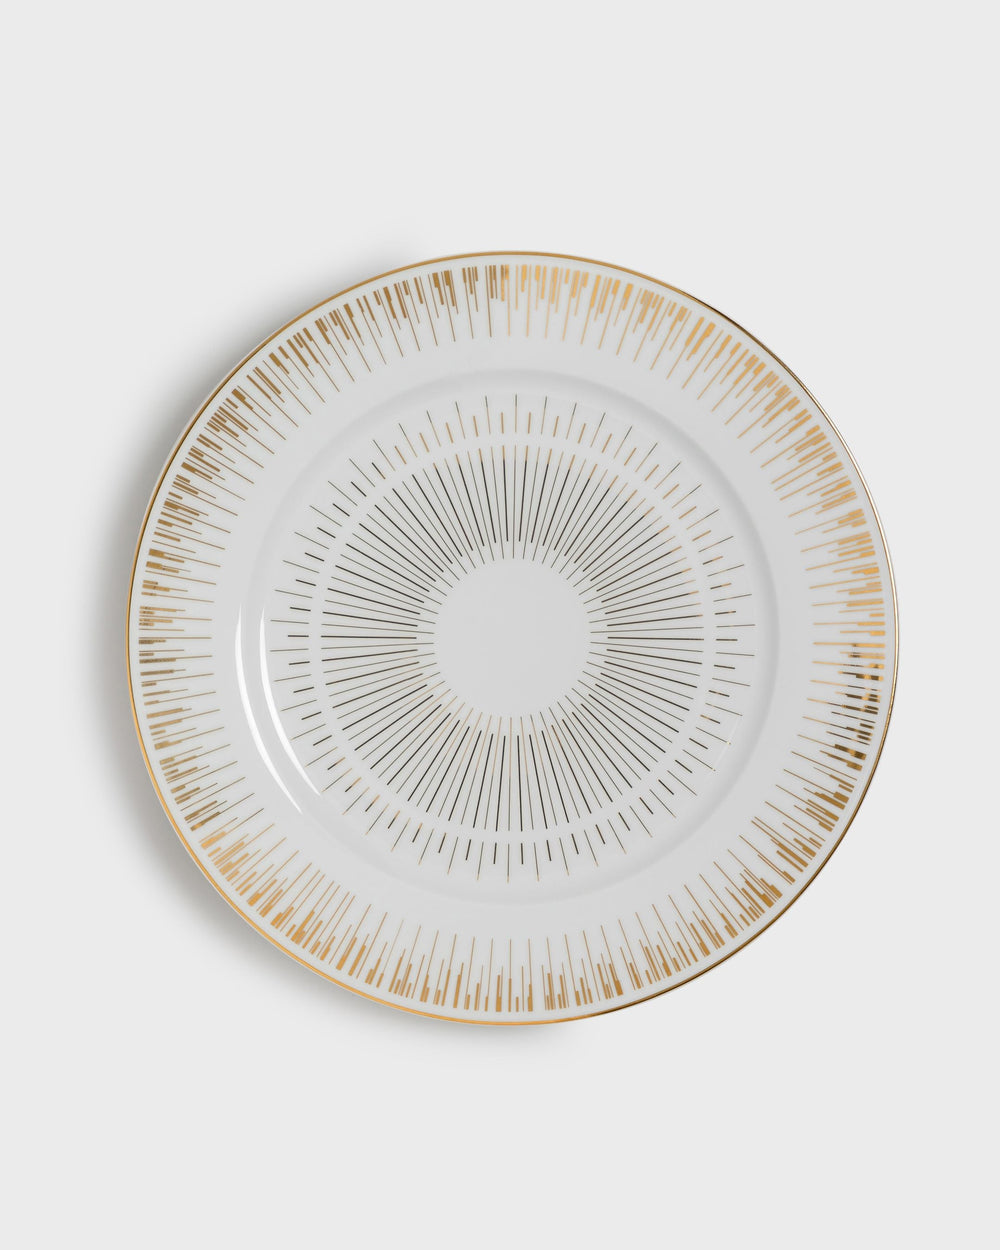 Tania Bulhoes Dinner Plate Astro